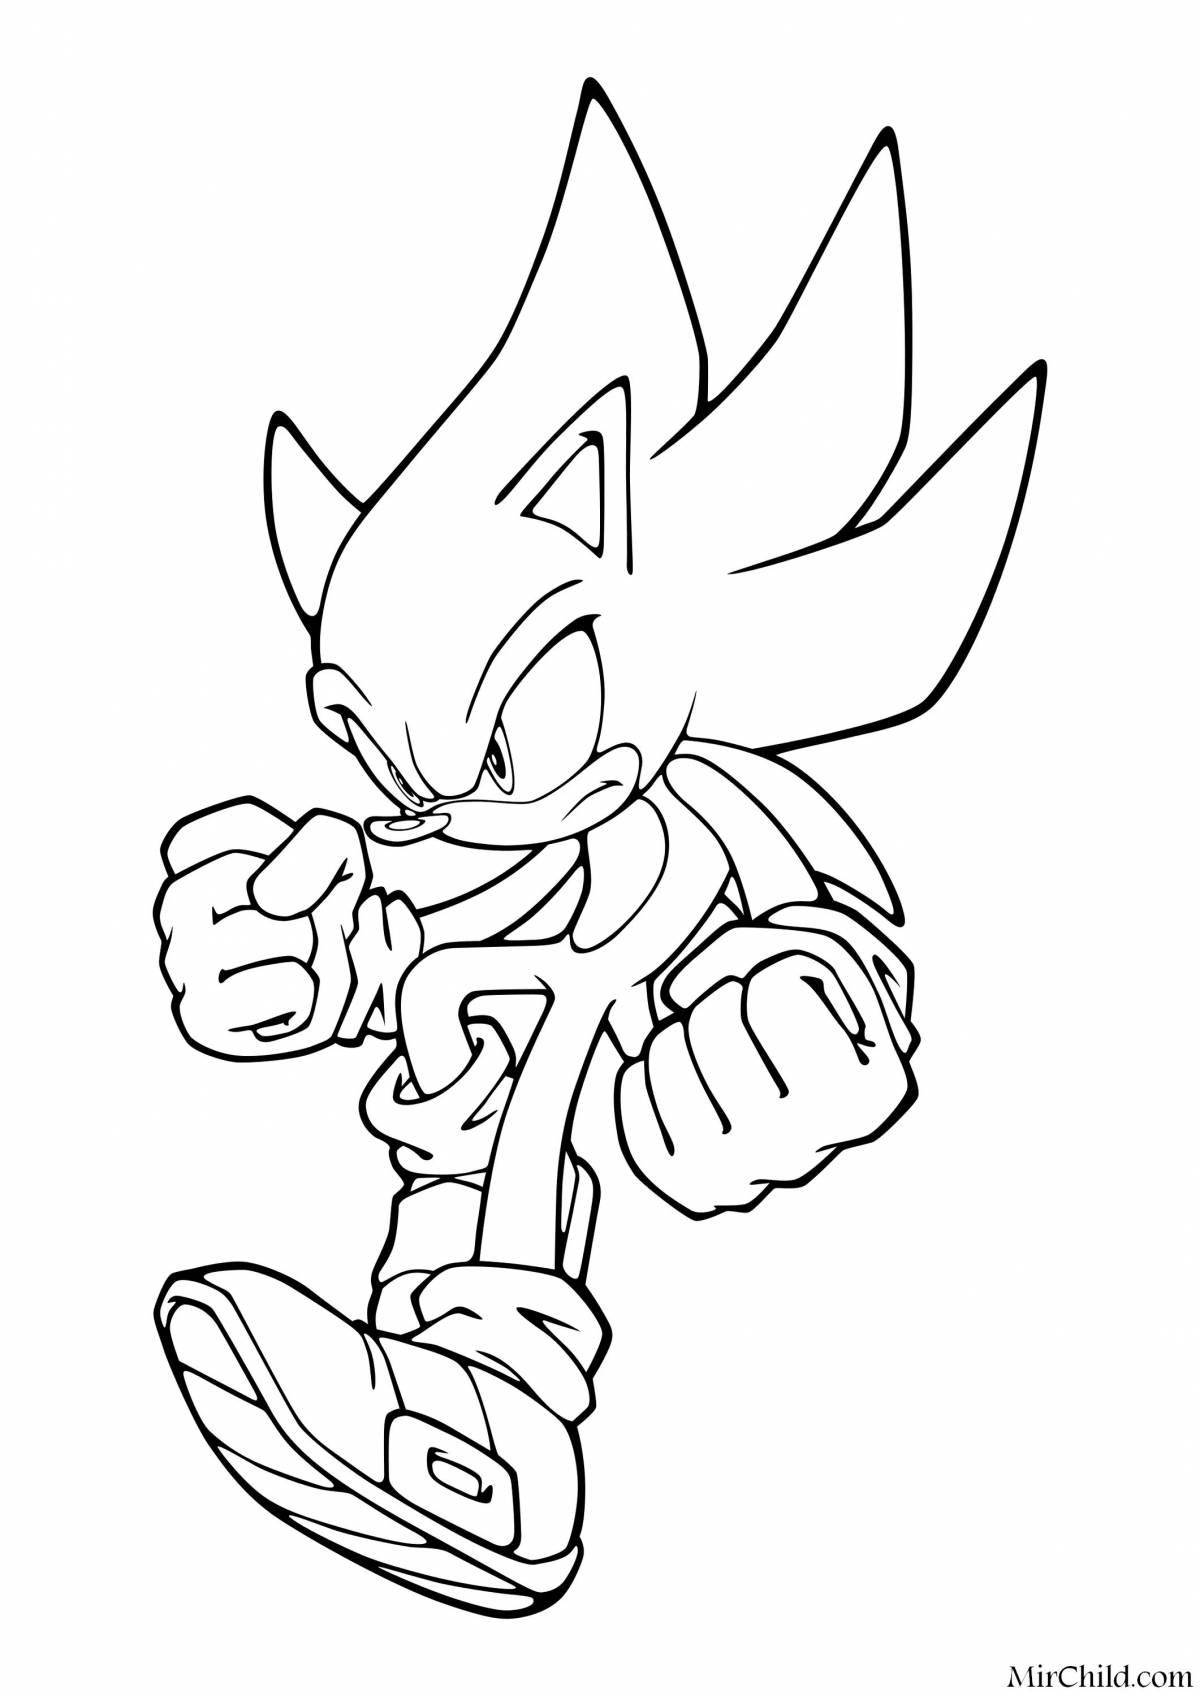 Sonic god amazing coloring book